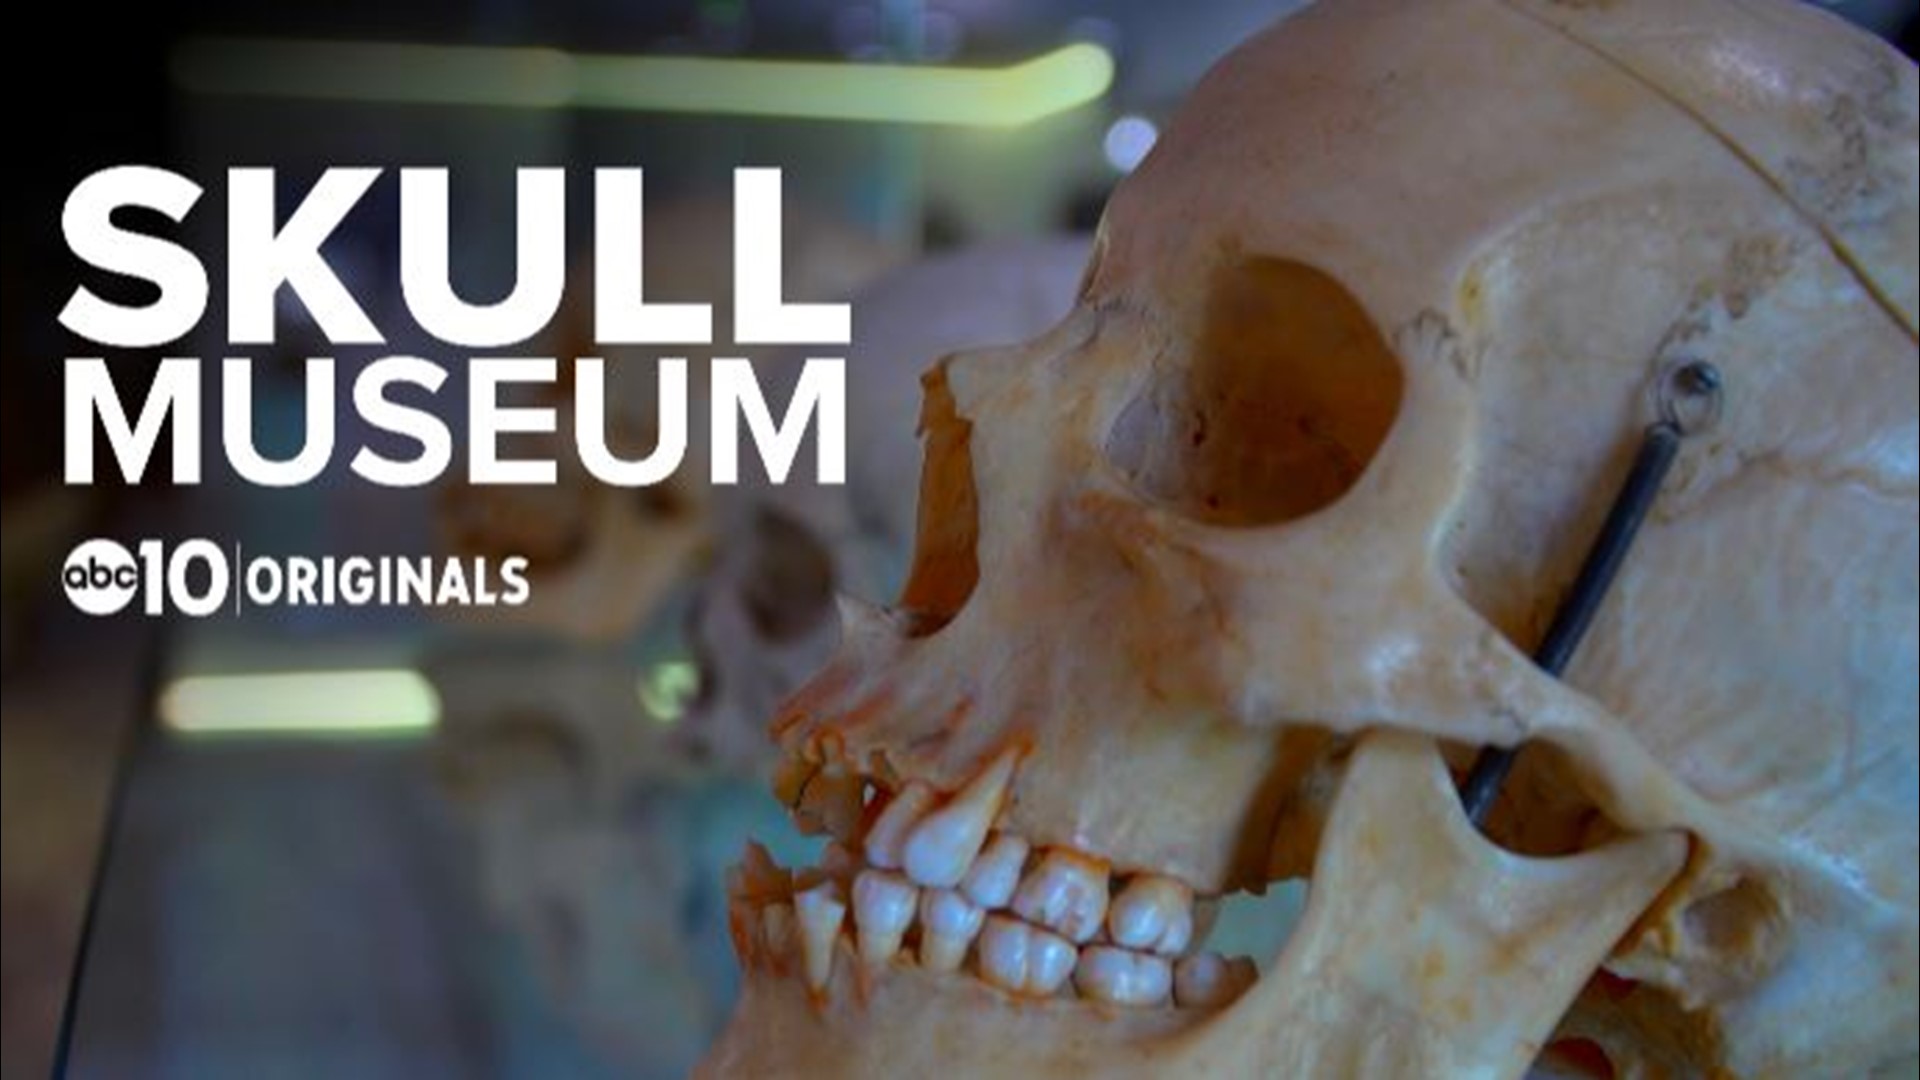 The Skull Museum is a tattoo parlor dedicated to skulls in midtown Sacramento. (April 10, 2018)